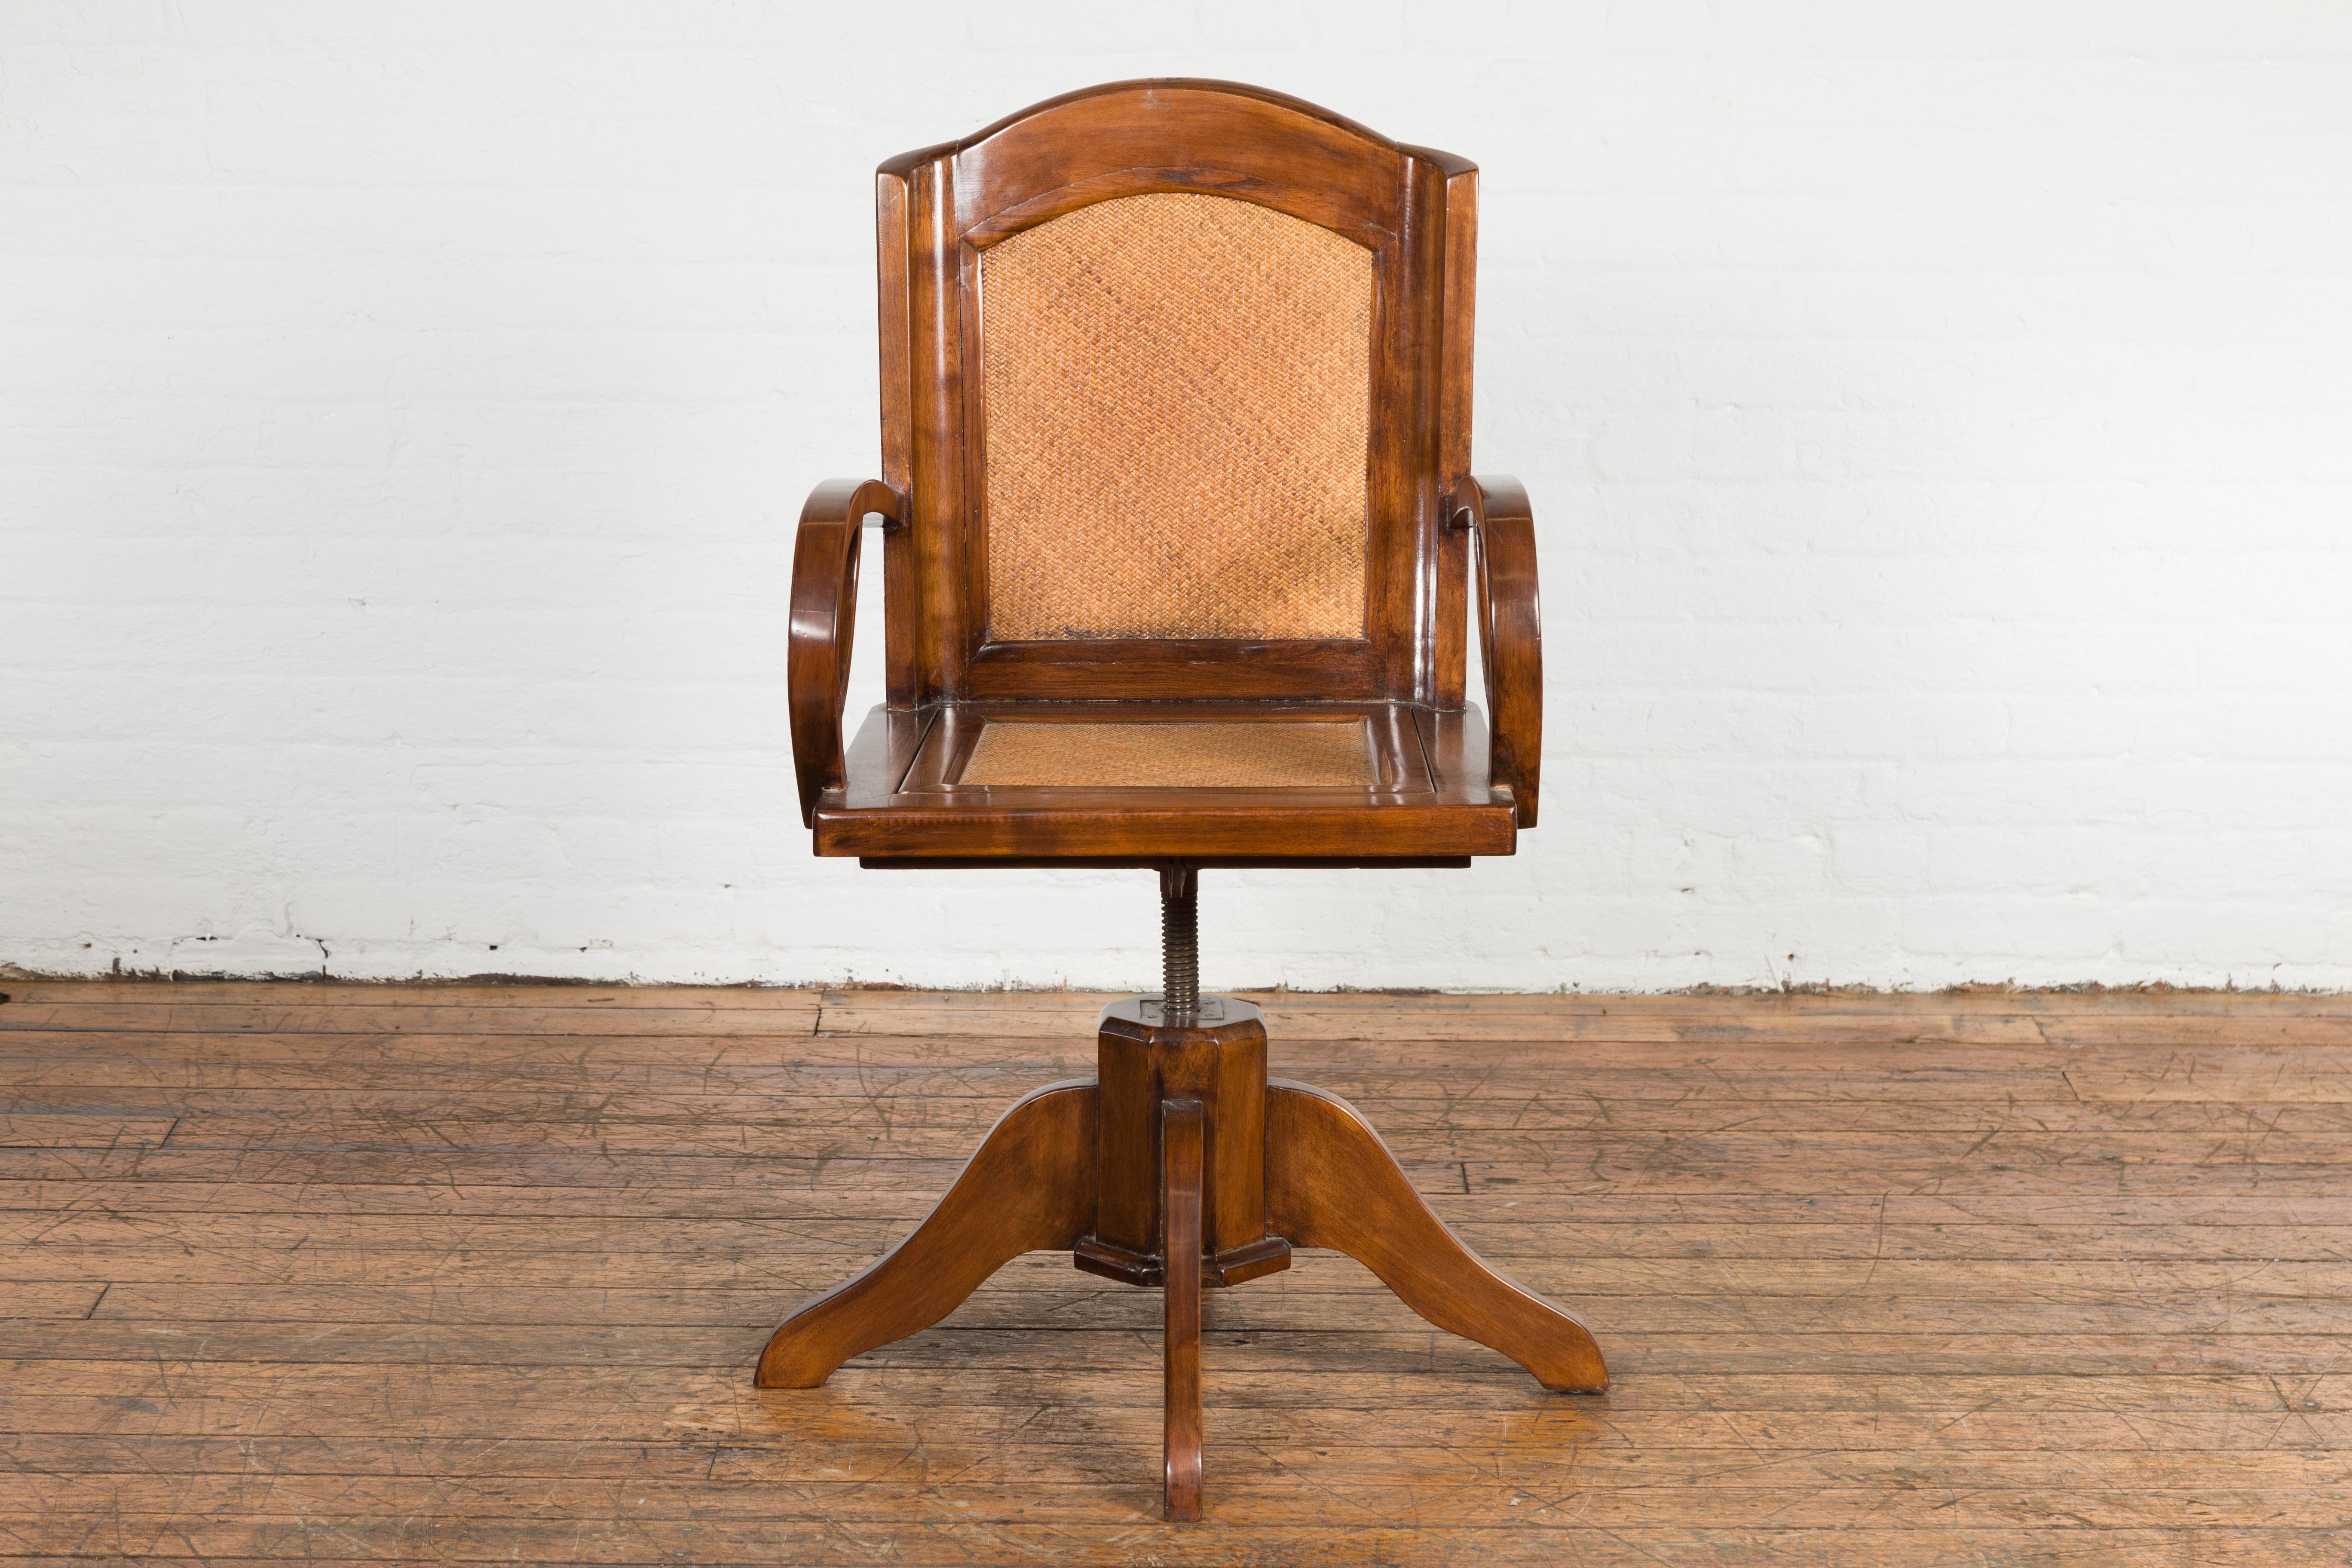 An Art Deco swivel desk chair from circa 1940 with woven rattan back and seat, loop arms and removable seat. A harmonious blend of form and function, this Art Deco Swivel desk chair from circa 1940 encapsulates the era's sophisticated aesthetic with